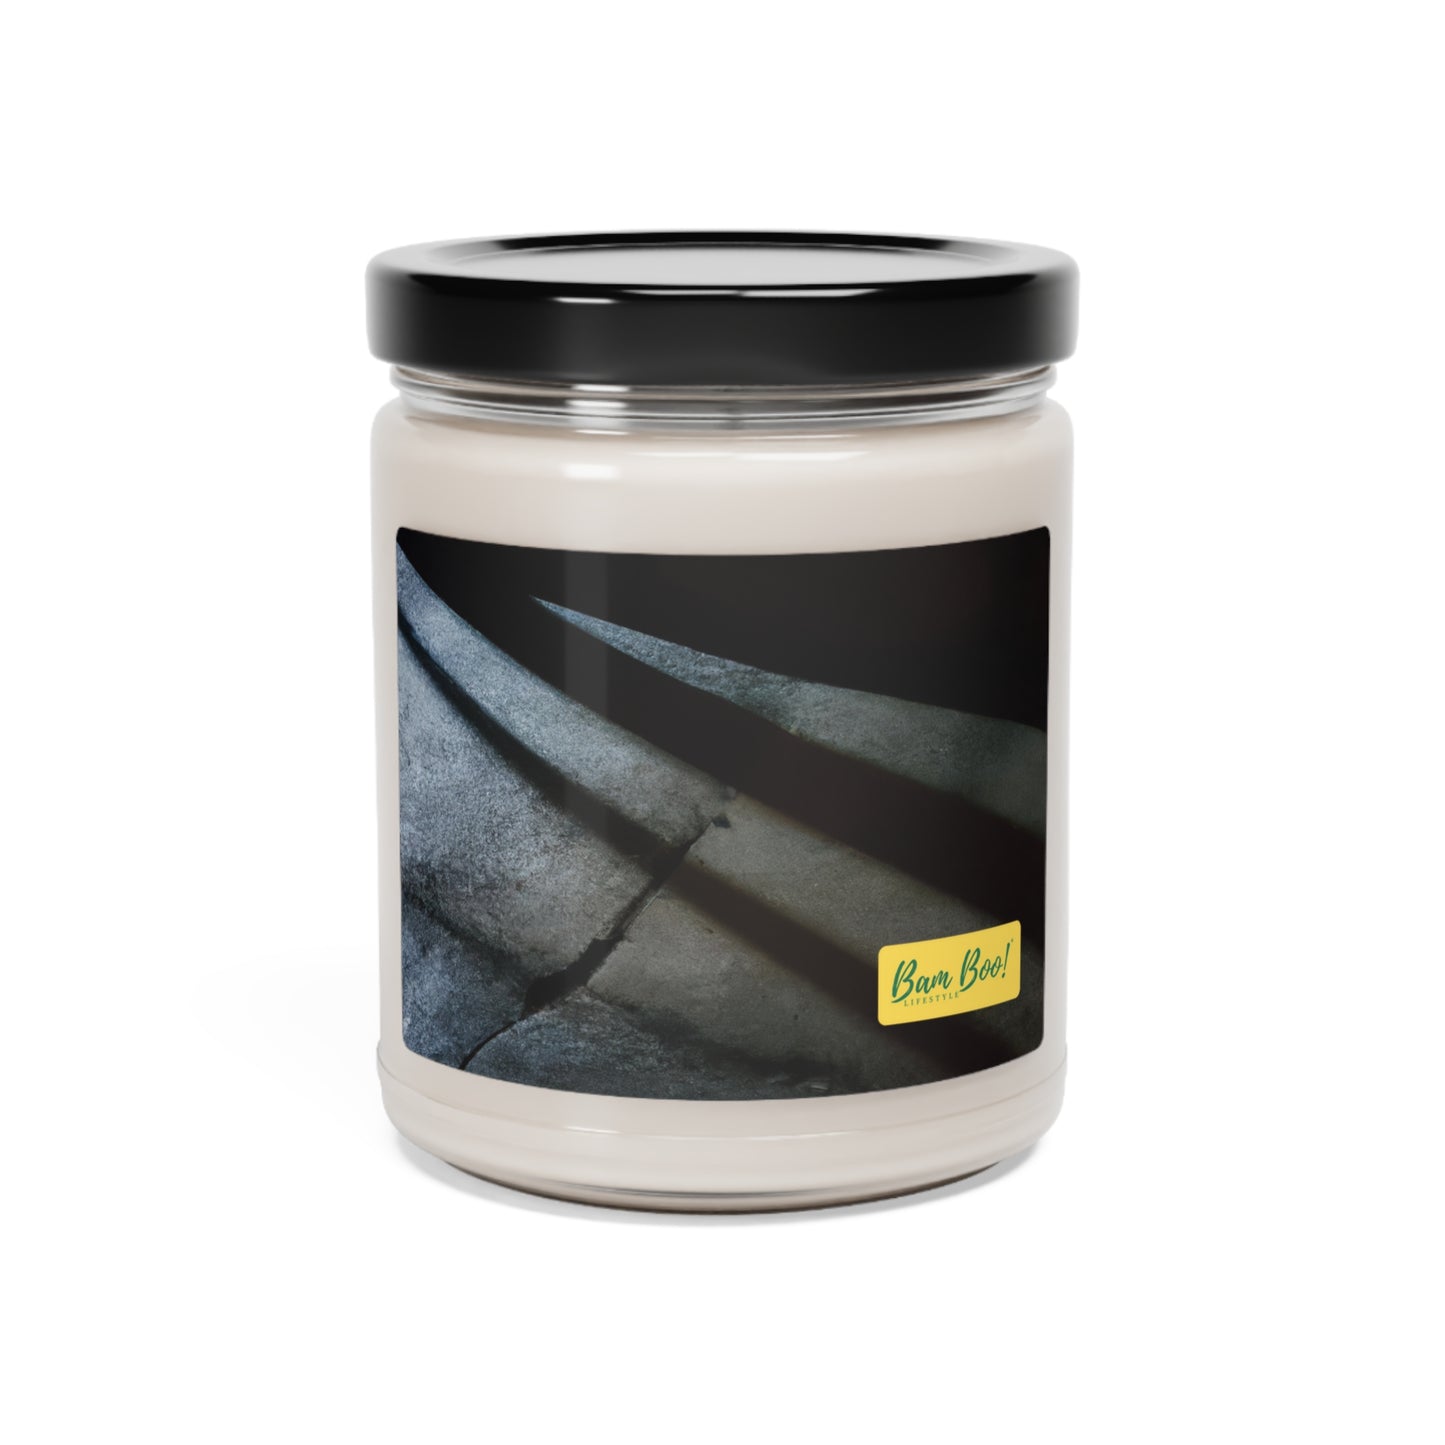 "Illuminating Contrasts: Exploring the Interface between Nature and Man" - Bam Boo! Lifestyle Eco-friendly Soy Candle